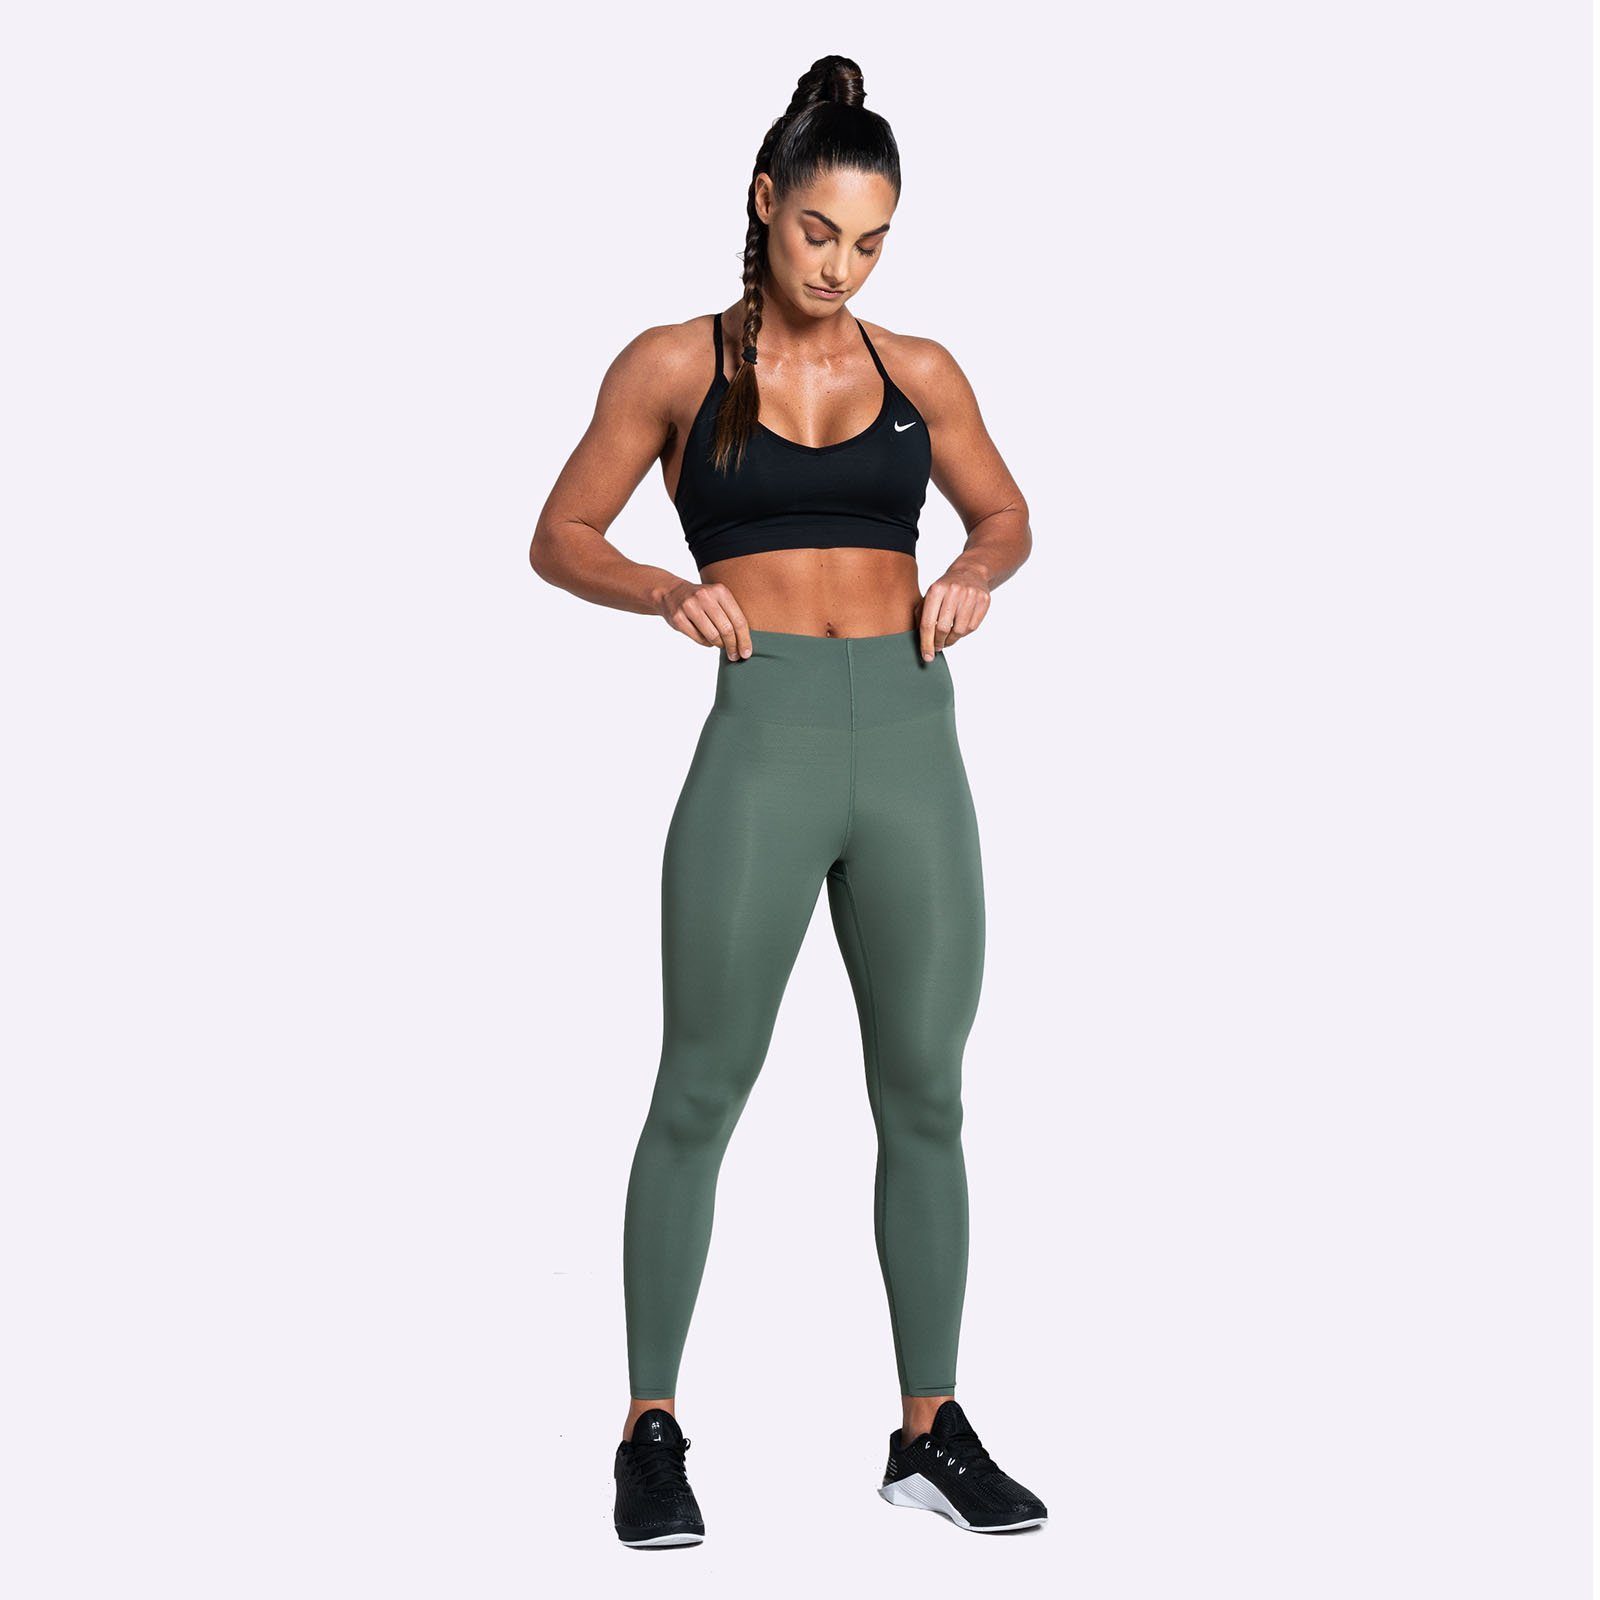 Nike Women's Sculpt Lux High Rise 7/8 Tight Fit Training Pants